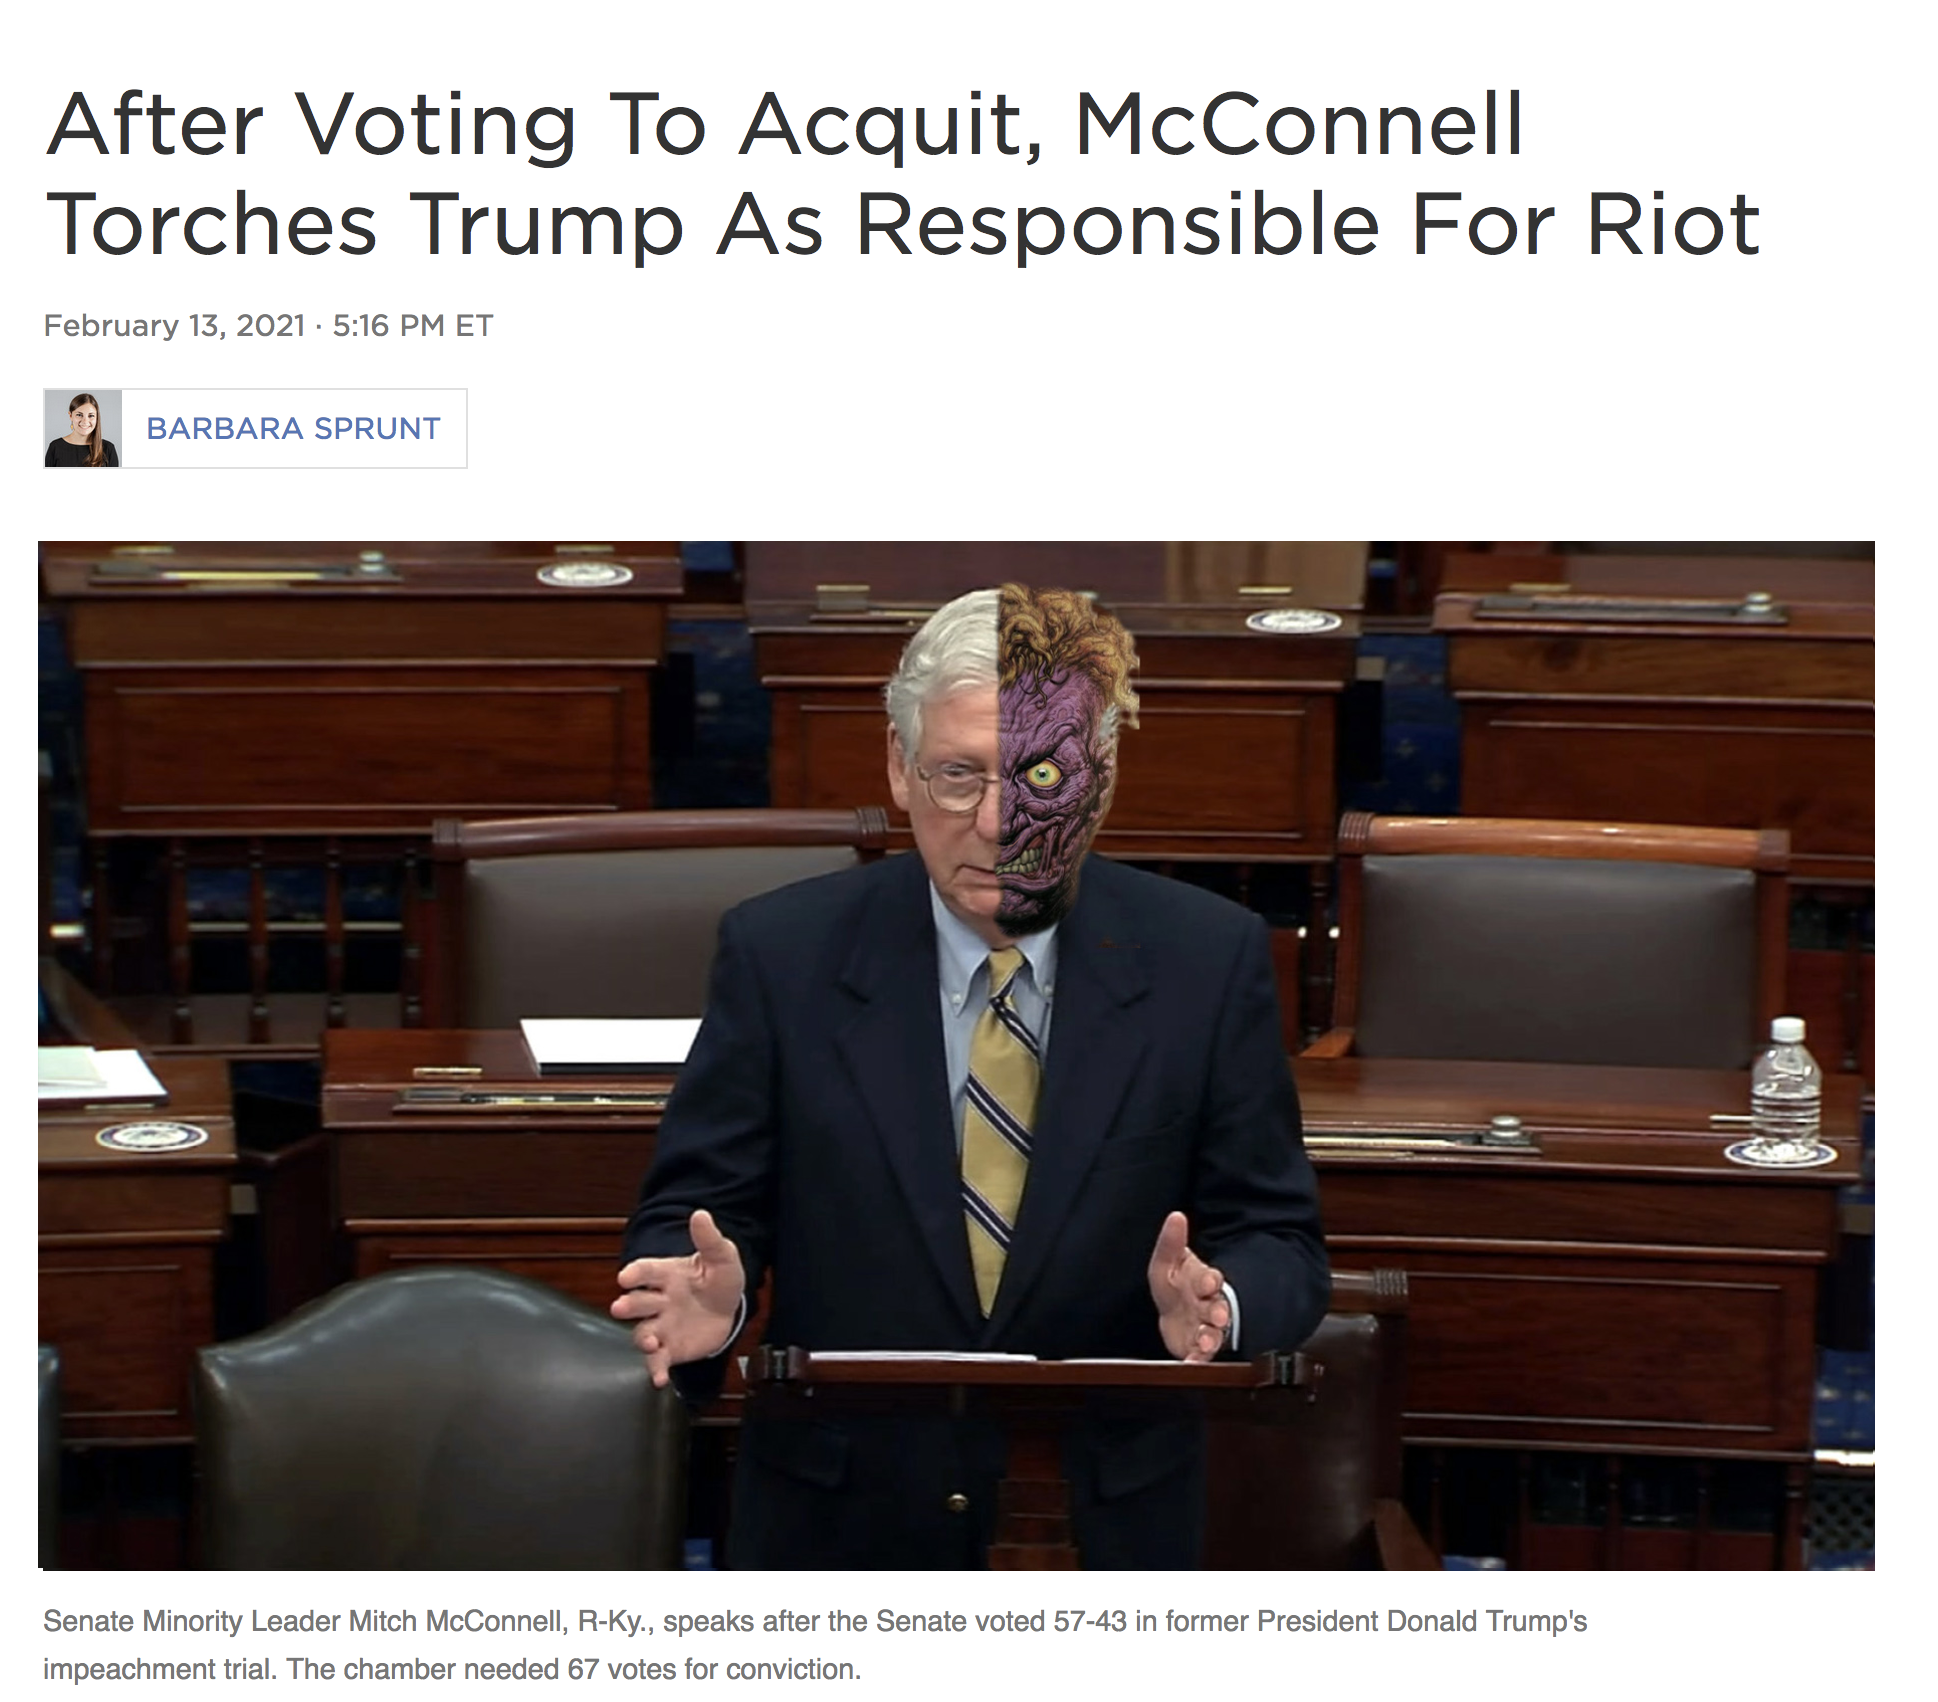 presentation - After Voting To Acquit, McConnell Torches Trump As Responsible For Riot Et Barbara Sprunt Senate Minority Leader Mitch McConnell, FKy. speaks alter the Senate voted 5743 informer President Donald Trump's impeachment trial. The chamber neede